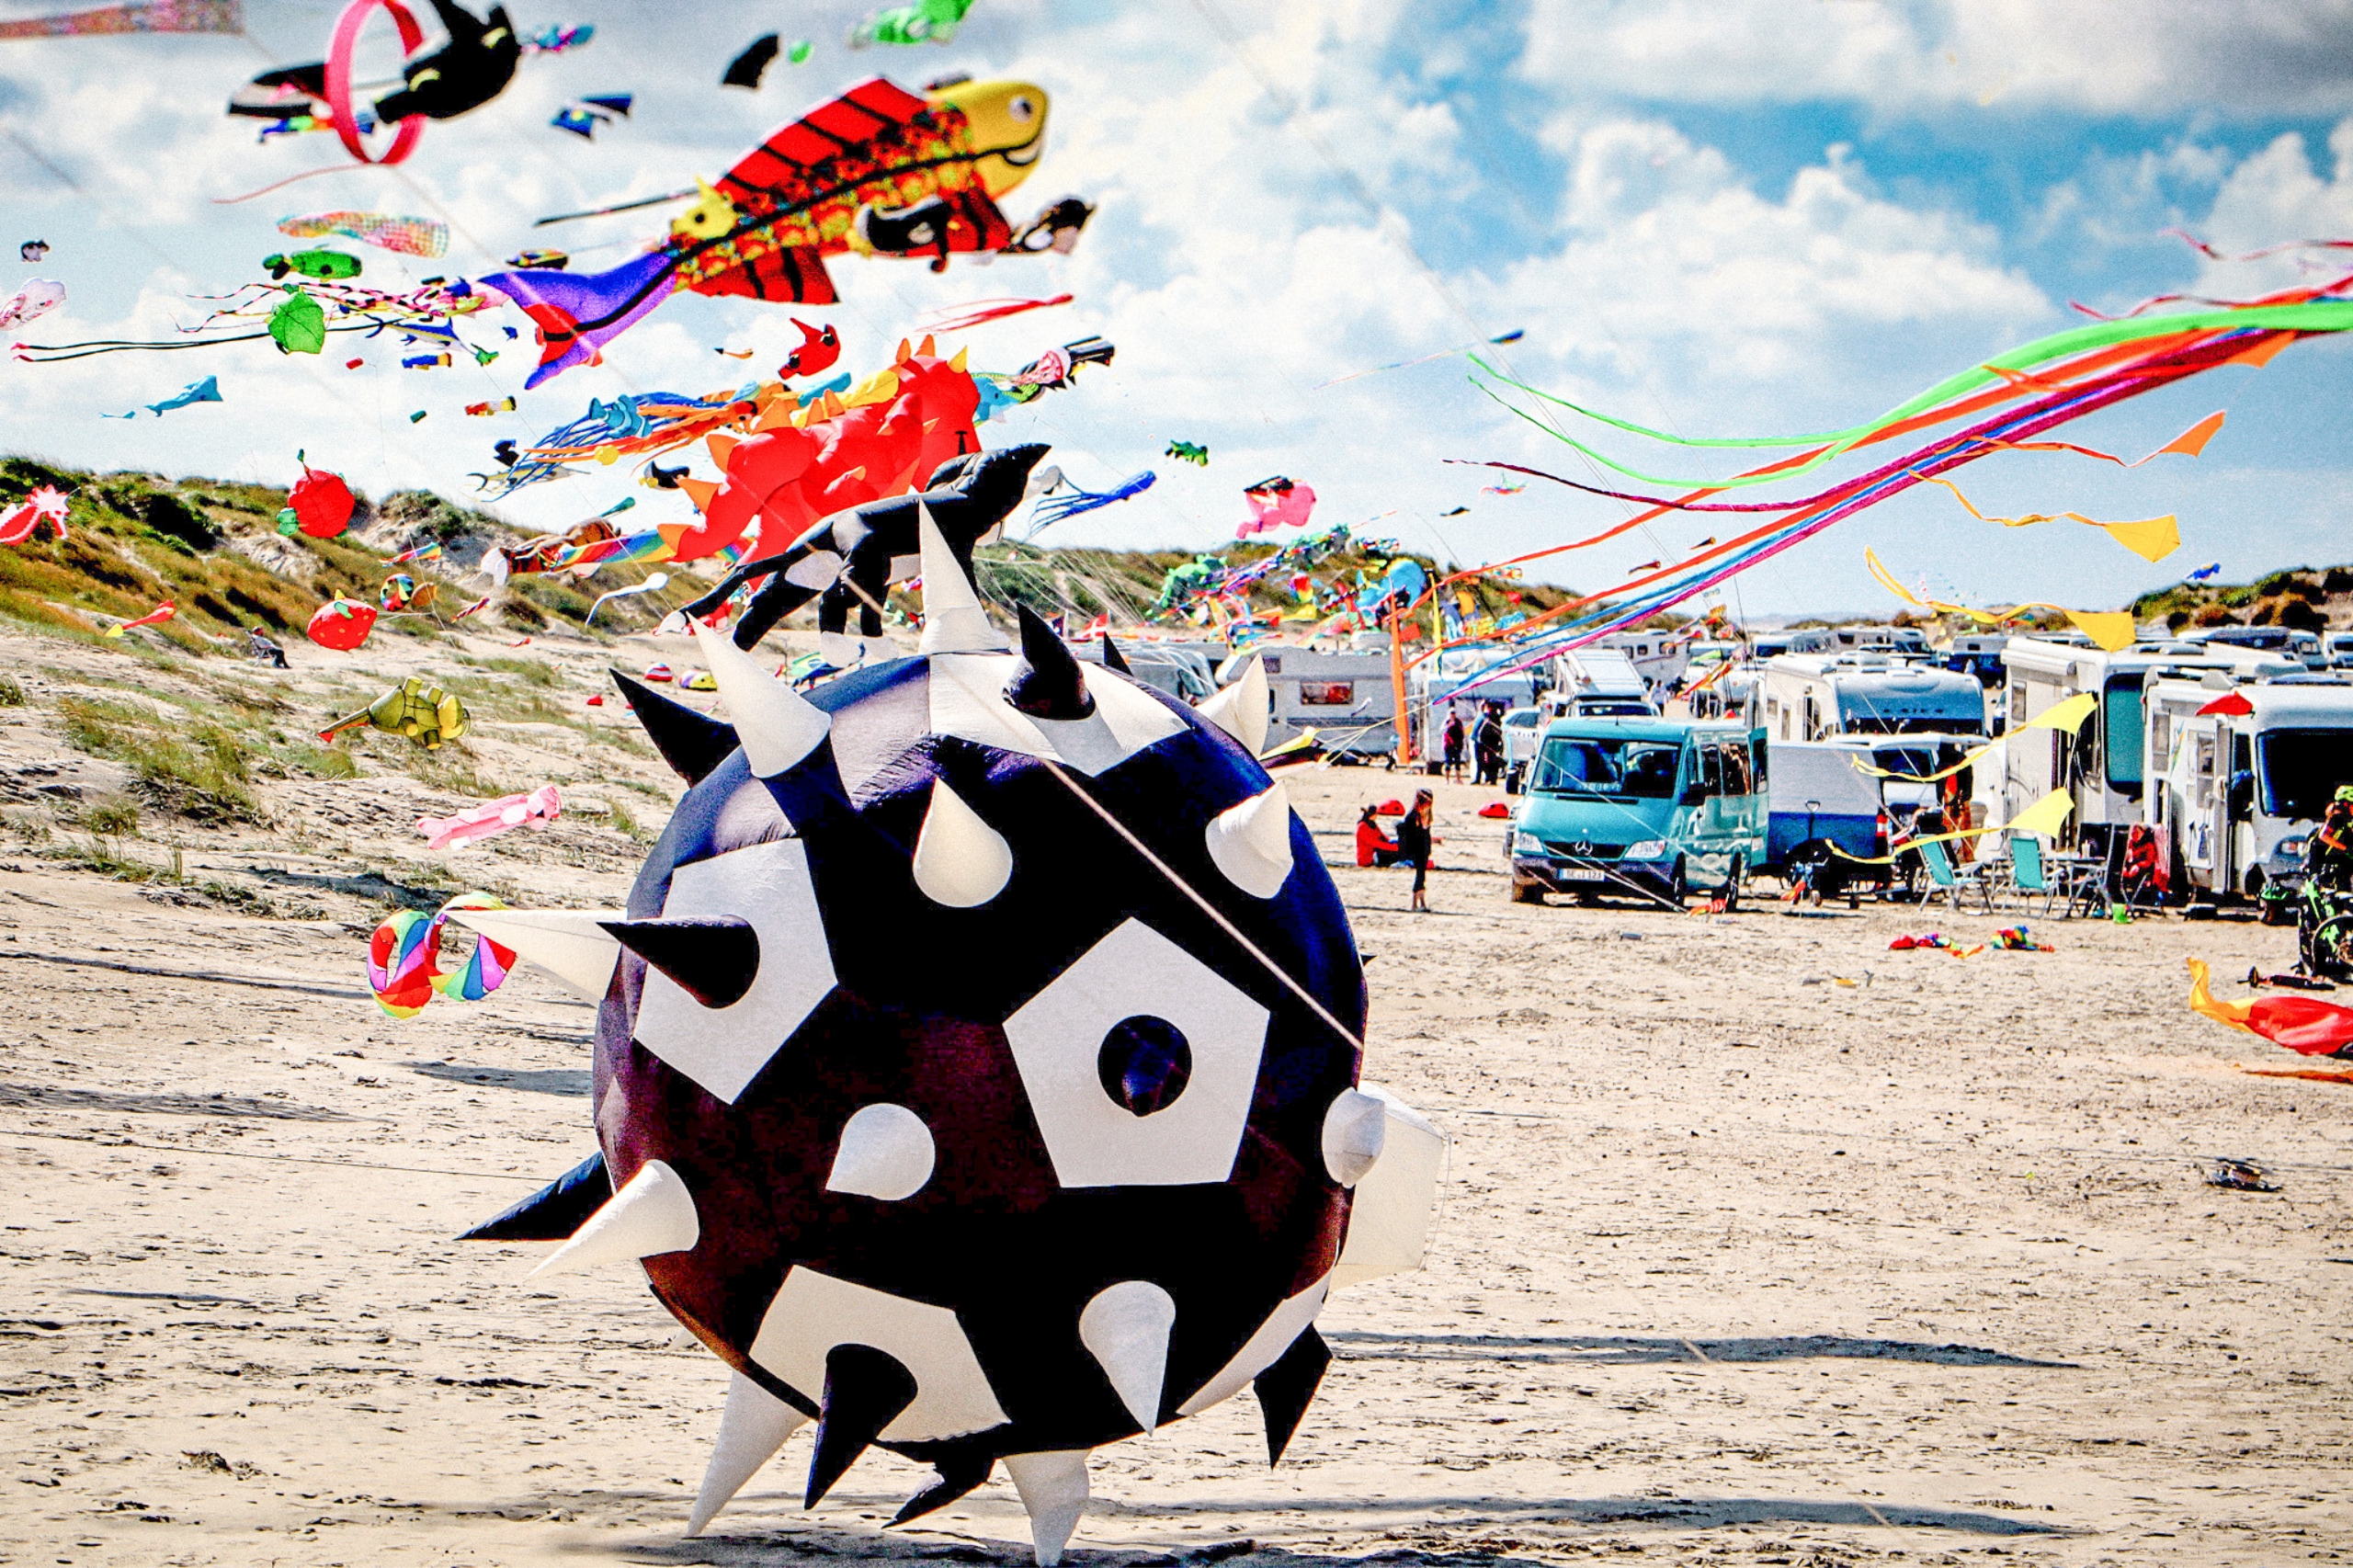 Festival takes place right on the adjacent Lakolk beach and is a colorful spectacle for the whole family.